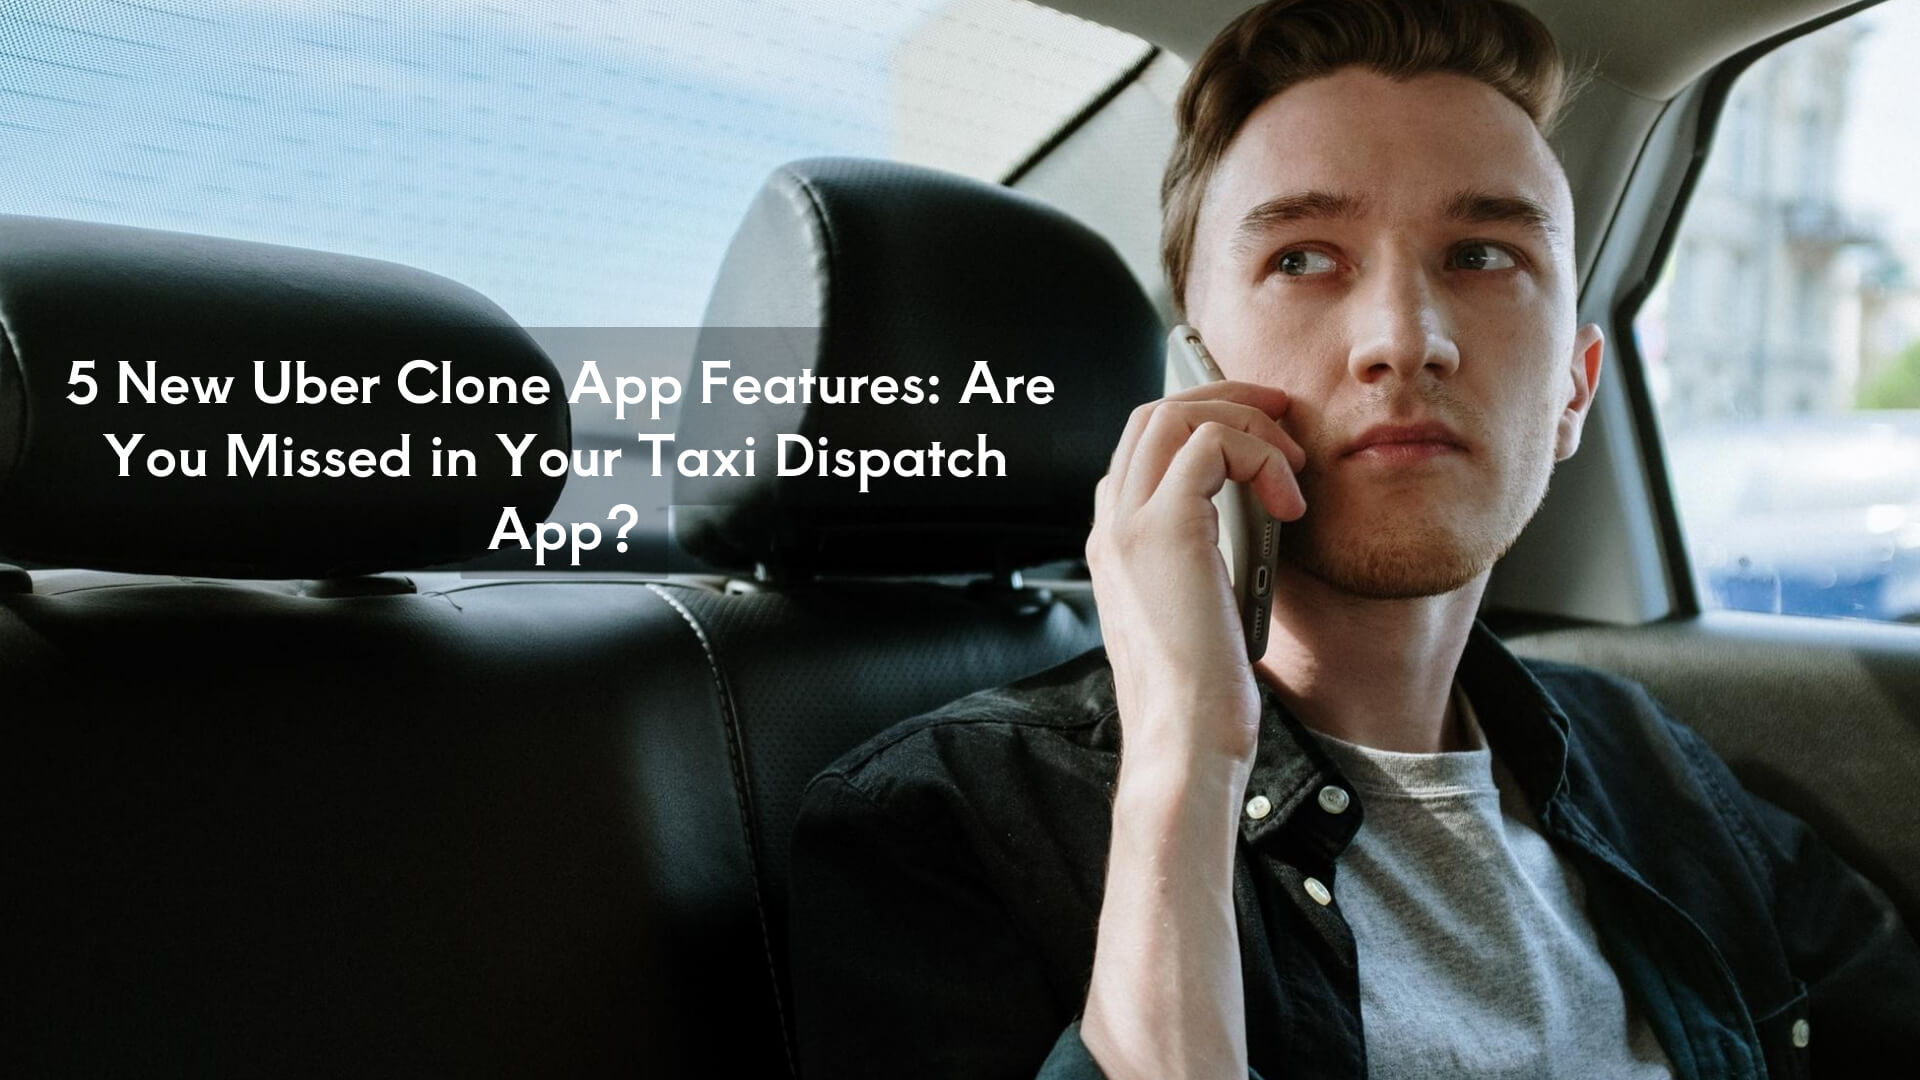 5 New Uber Clone App Features: Are You Missed in Your Taxi Dispatch App?